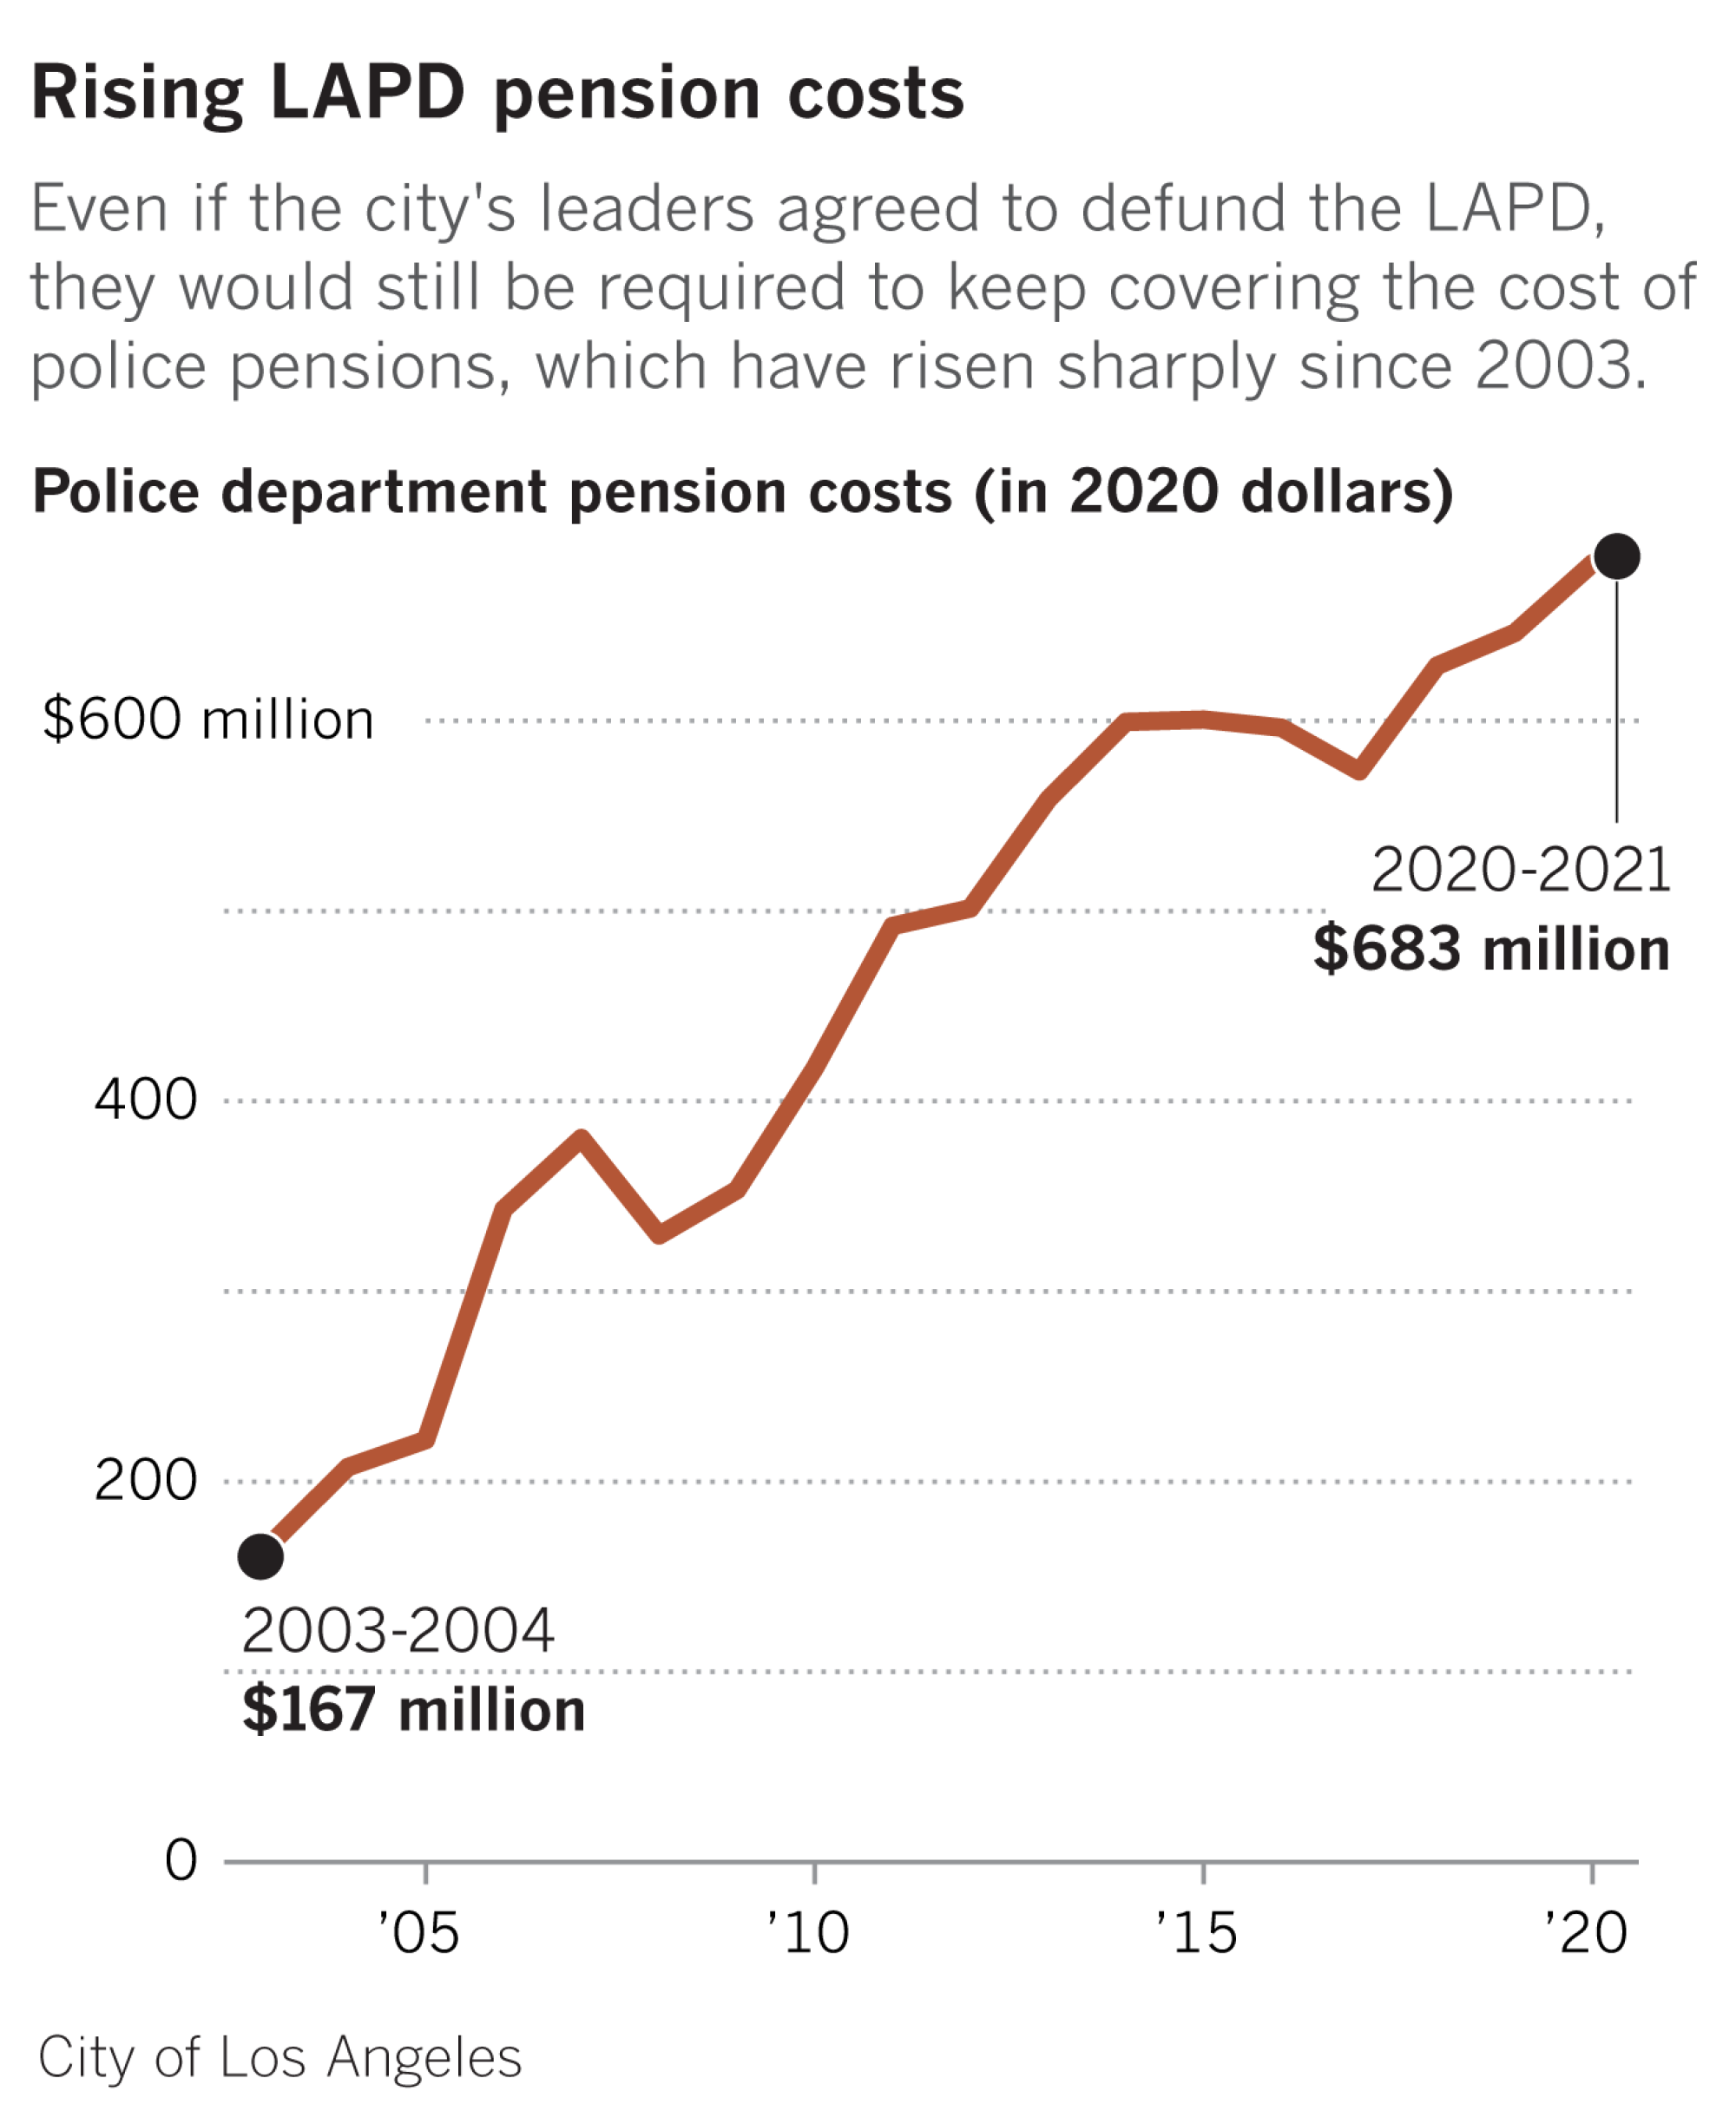 Rising LAPD pension costs